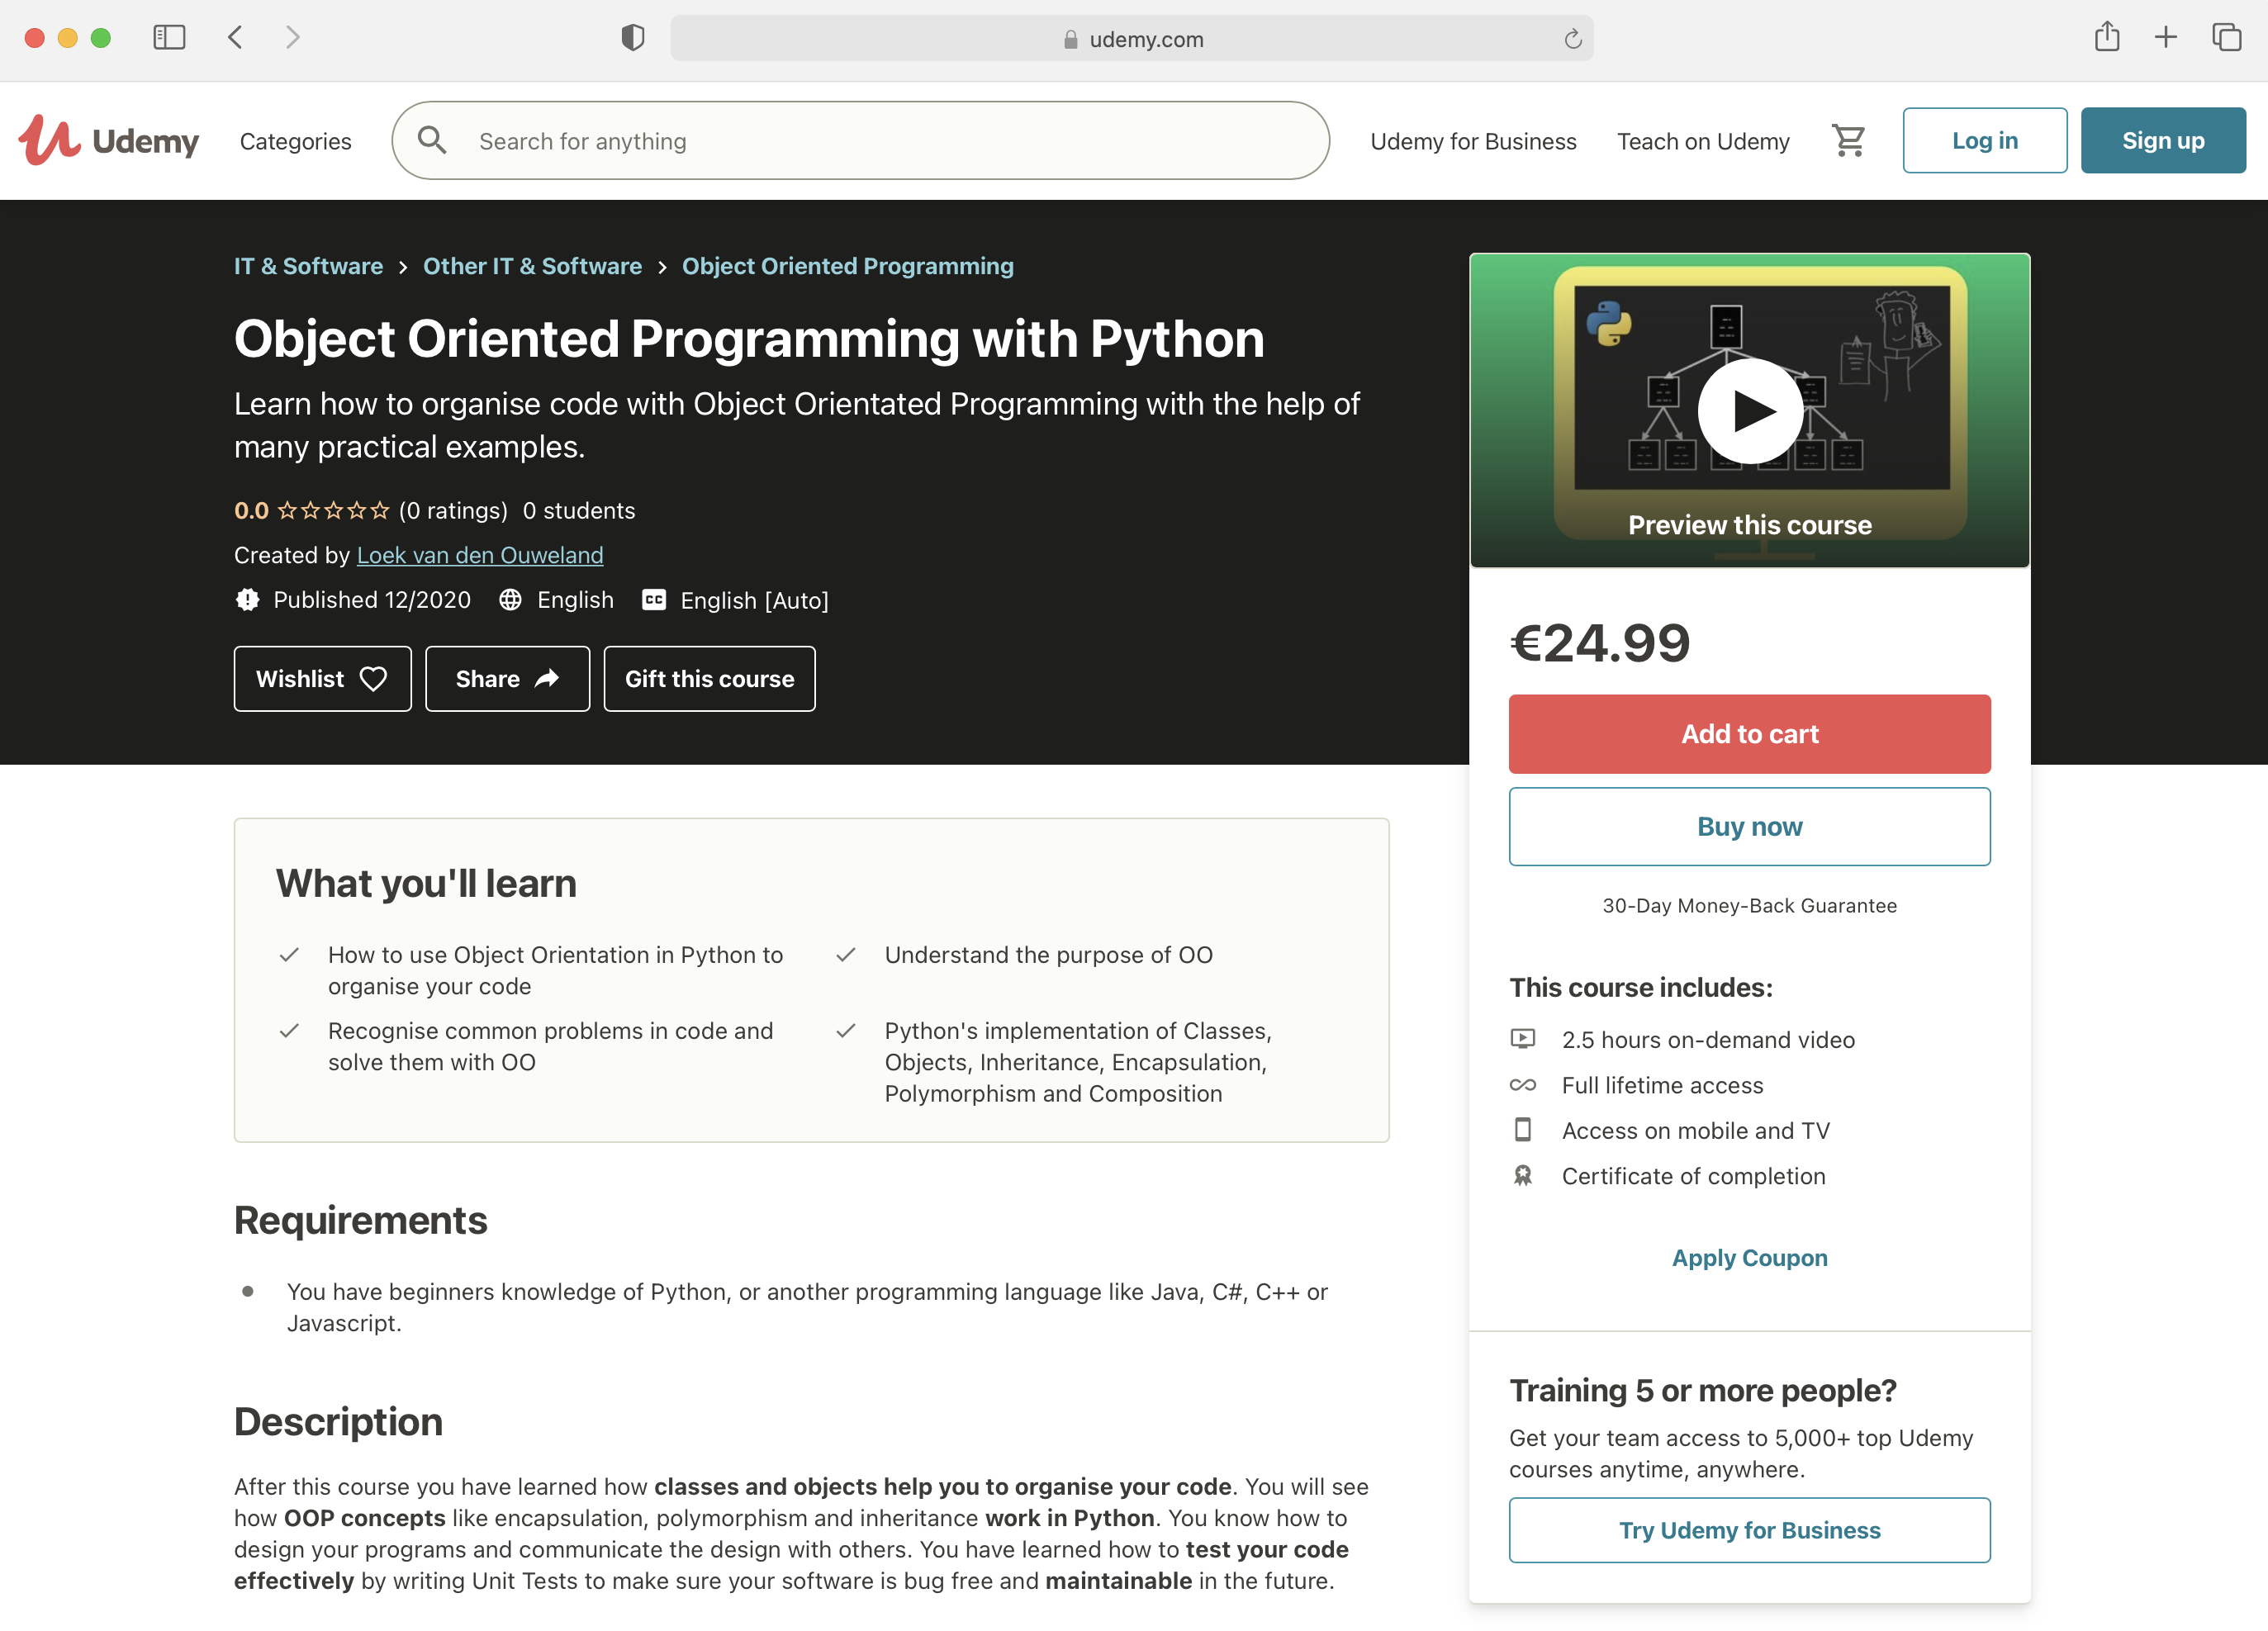 Object oriented programming in Python on Udemy